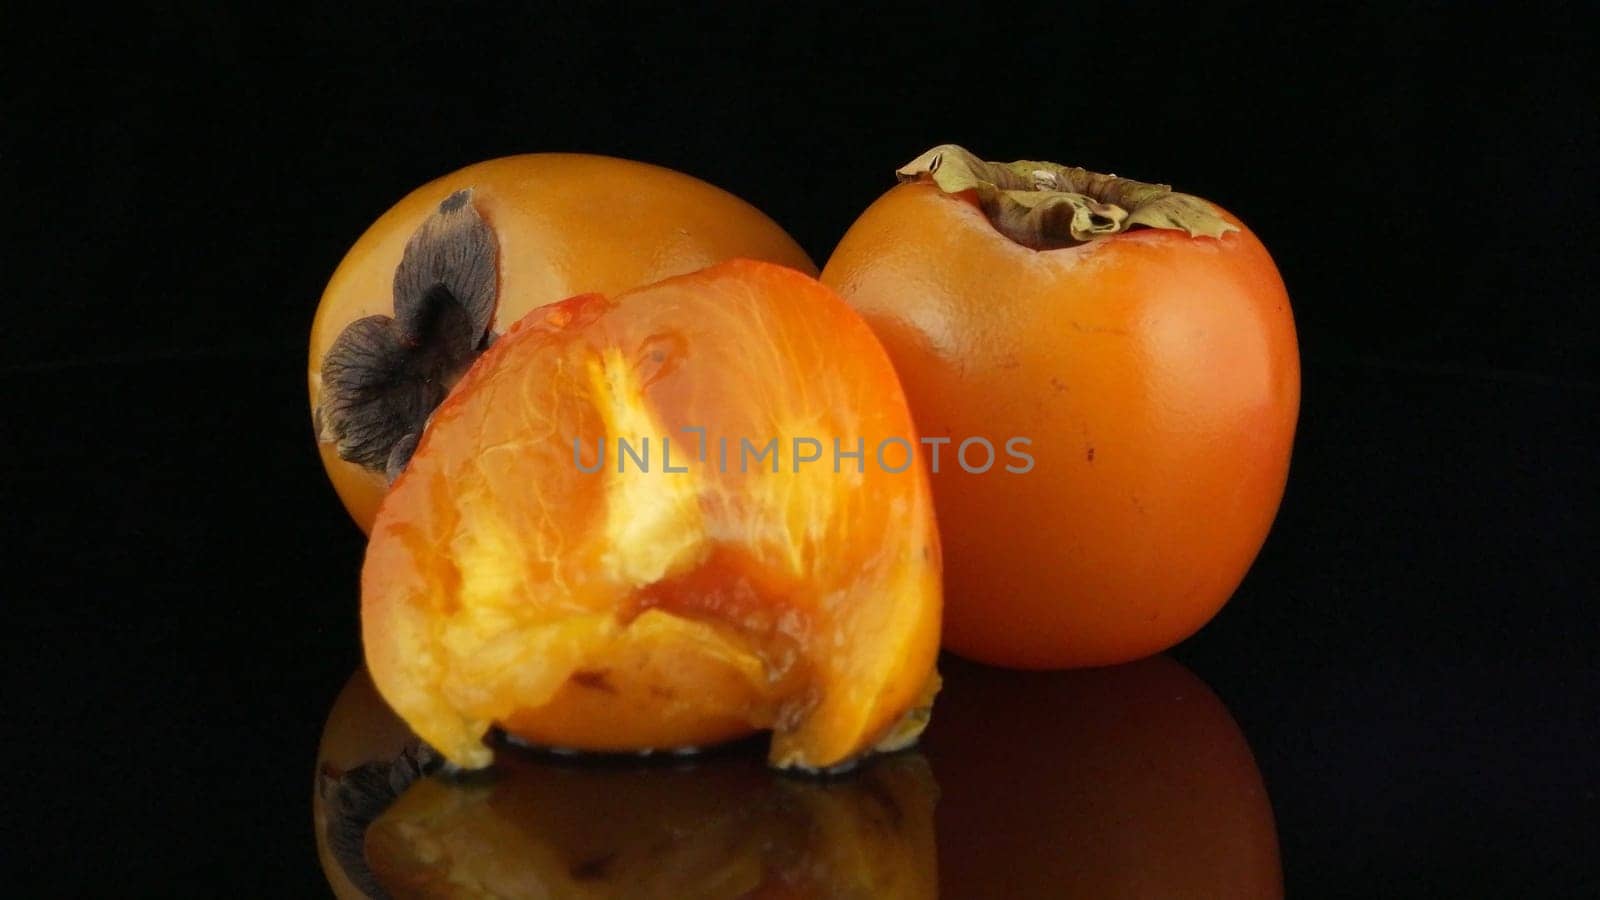 Red ripe persimmons by homydesign